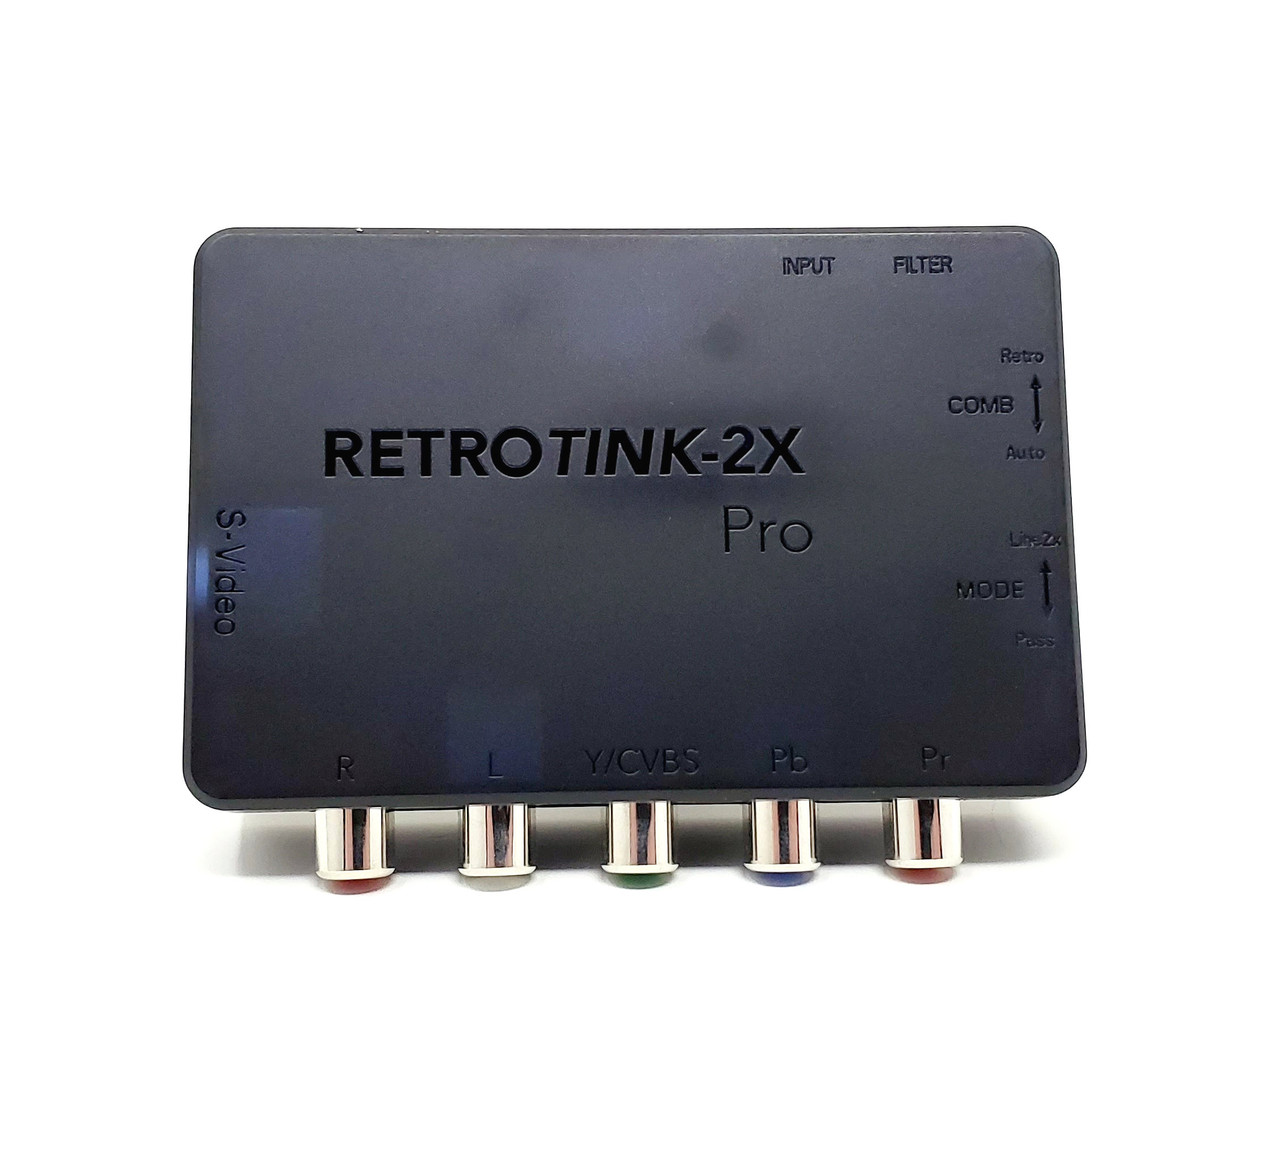 RetroTink 2X Pro Multi-Format - Component, S-video, Composite, to 